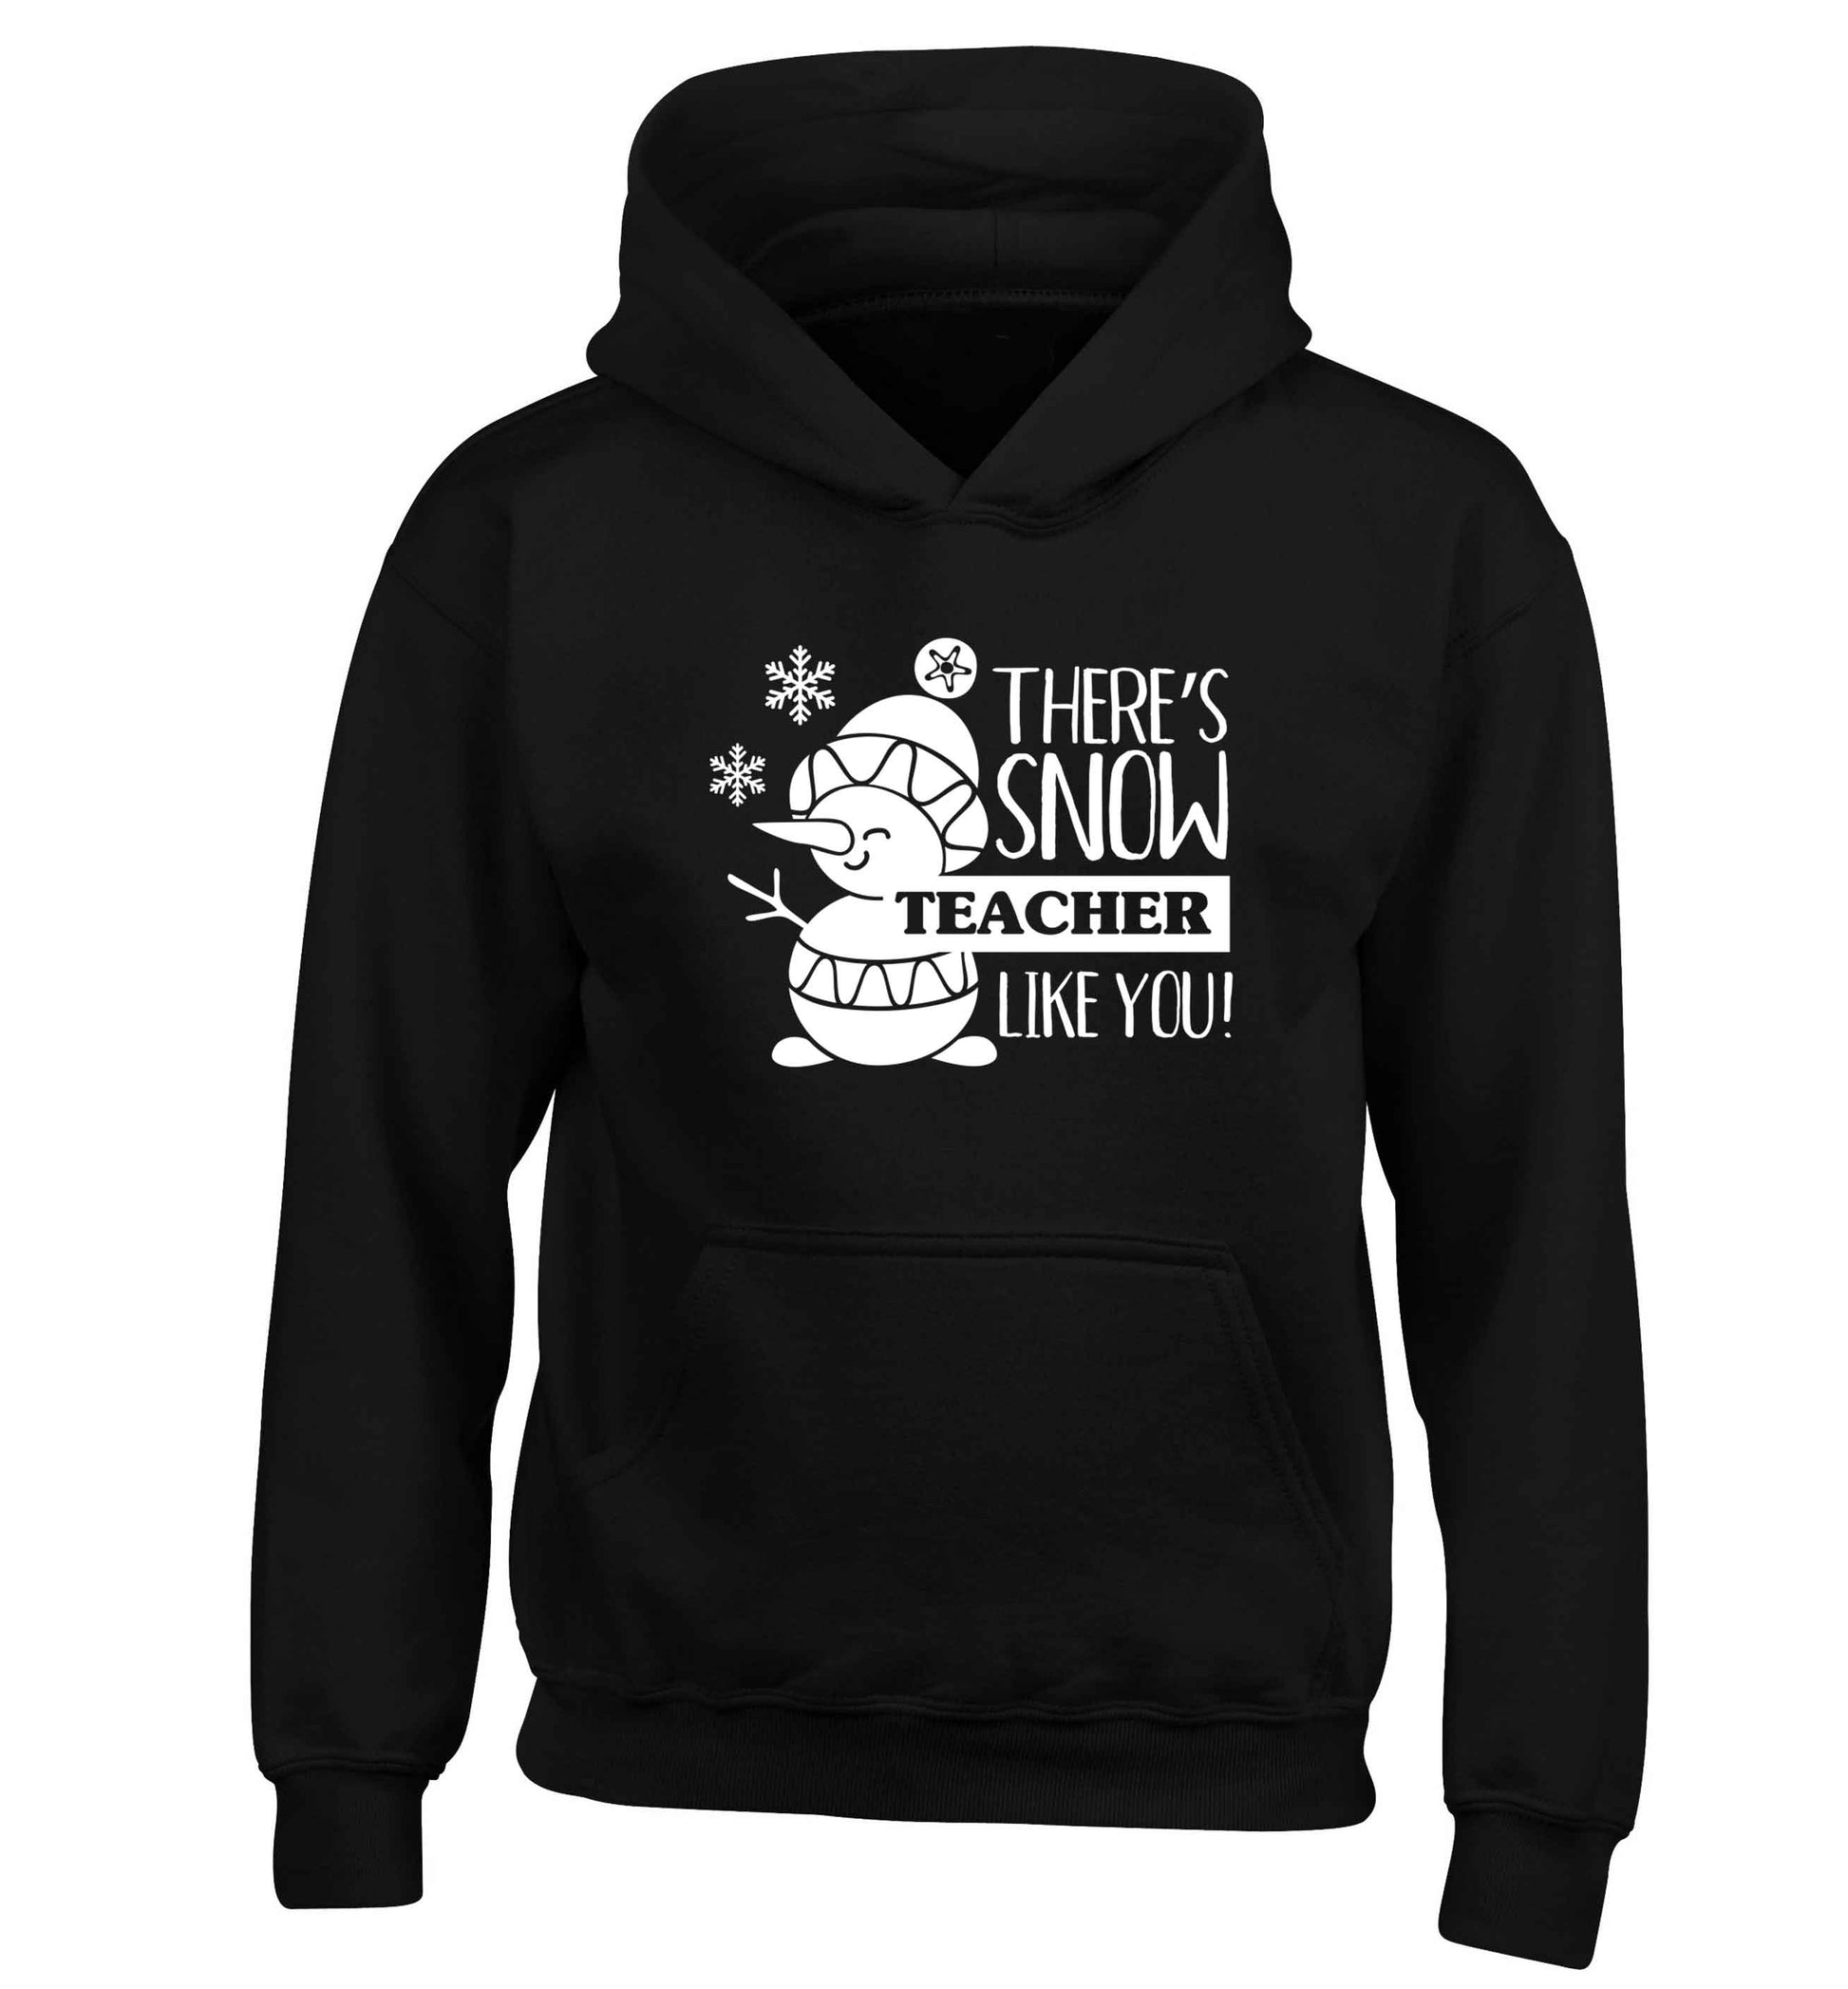 There's snow teacher like you children's black hoodie 12-13 Years